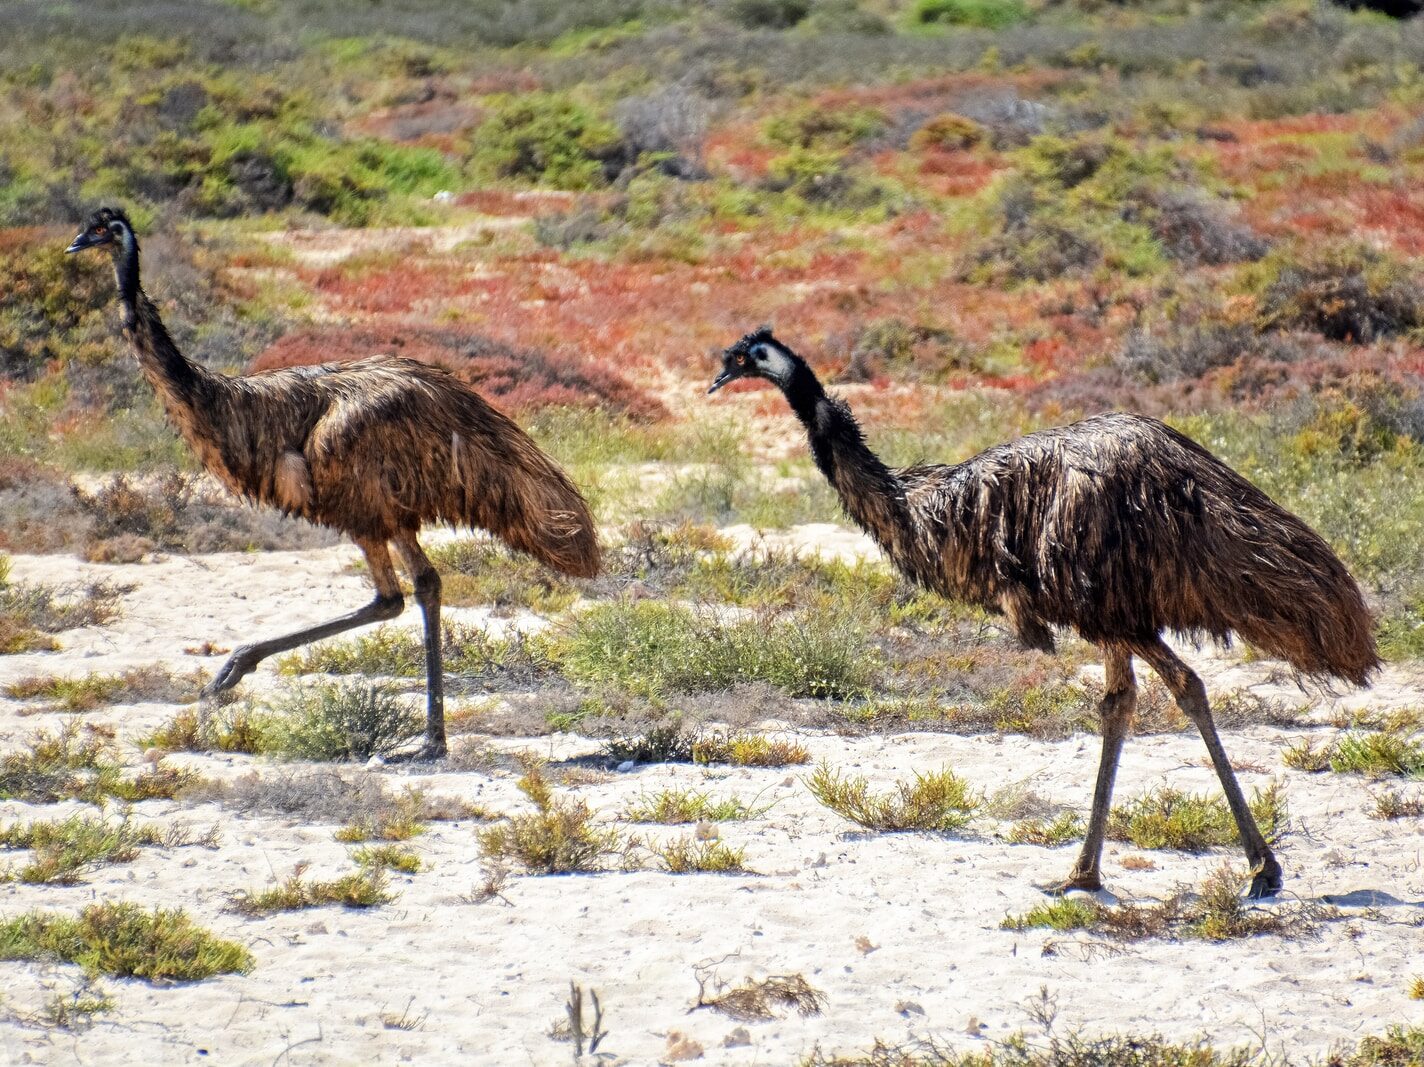 black and brown ostrich walking on brown field during daytime